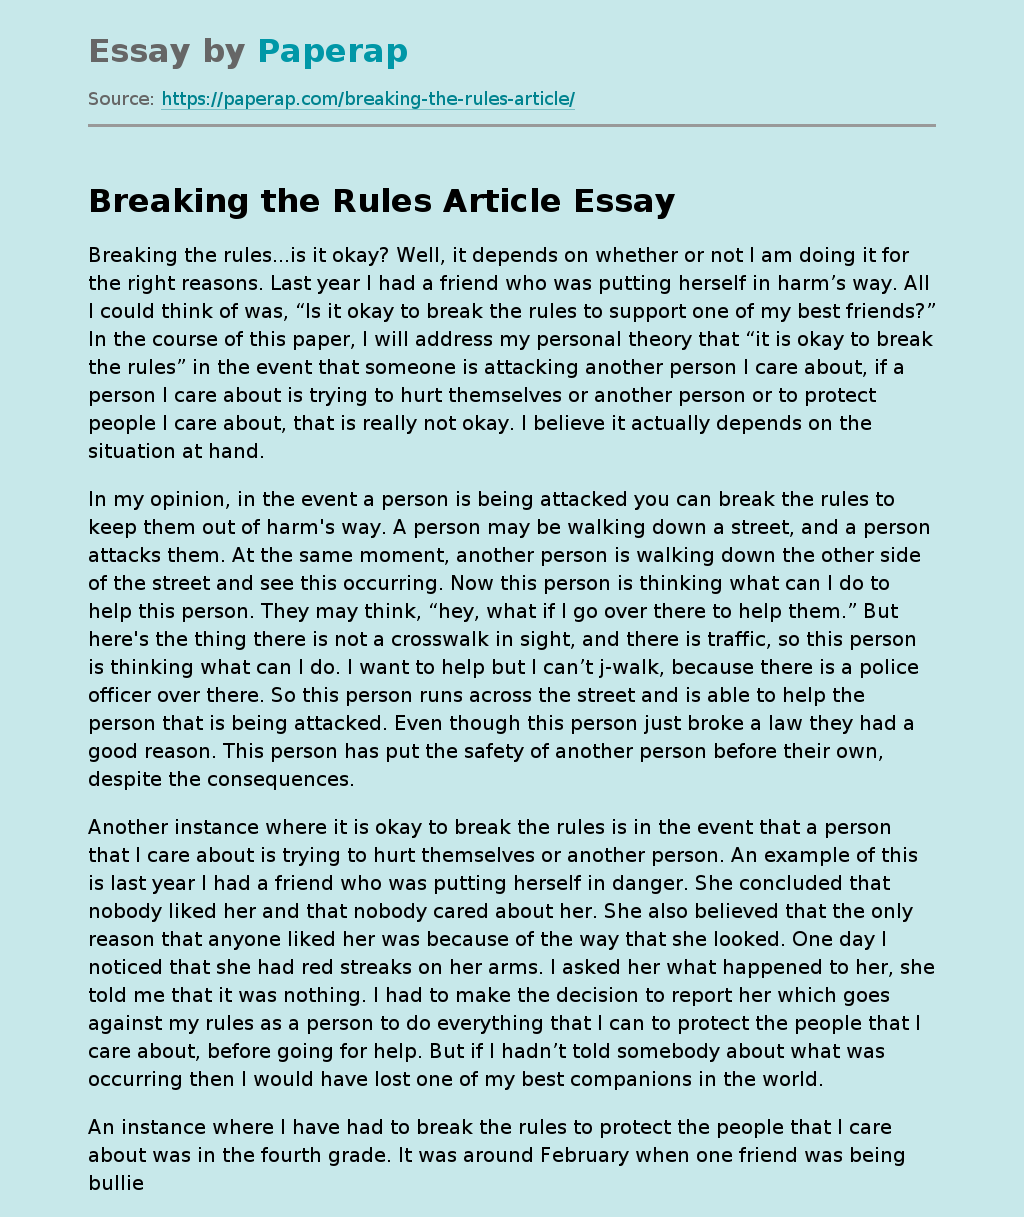 Breaking the Rules Article